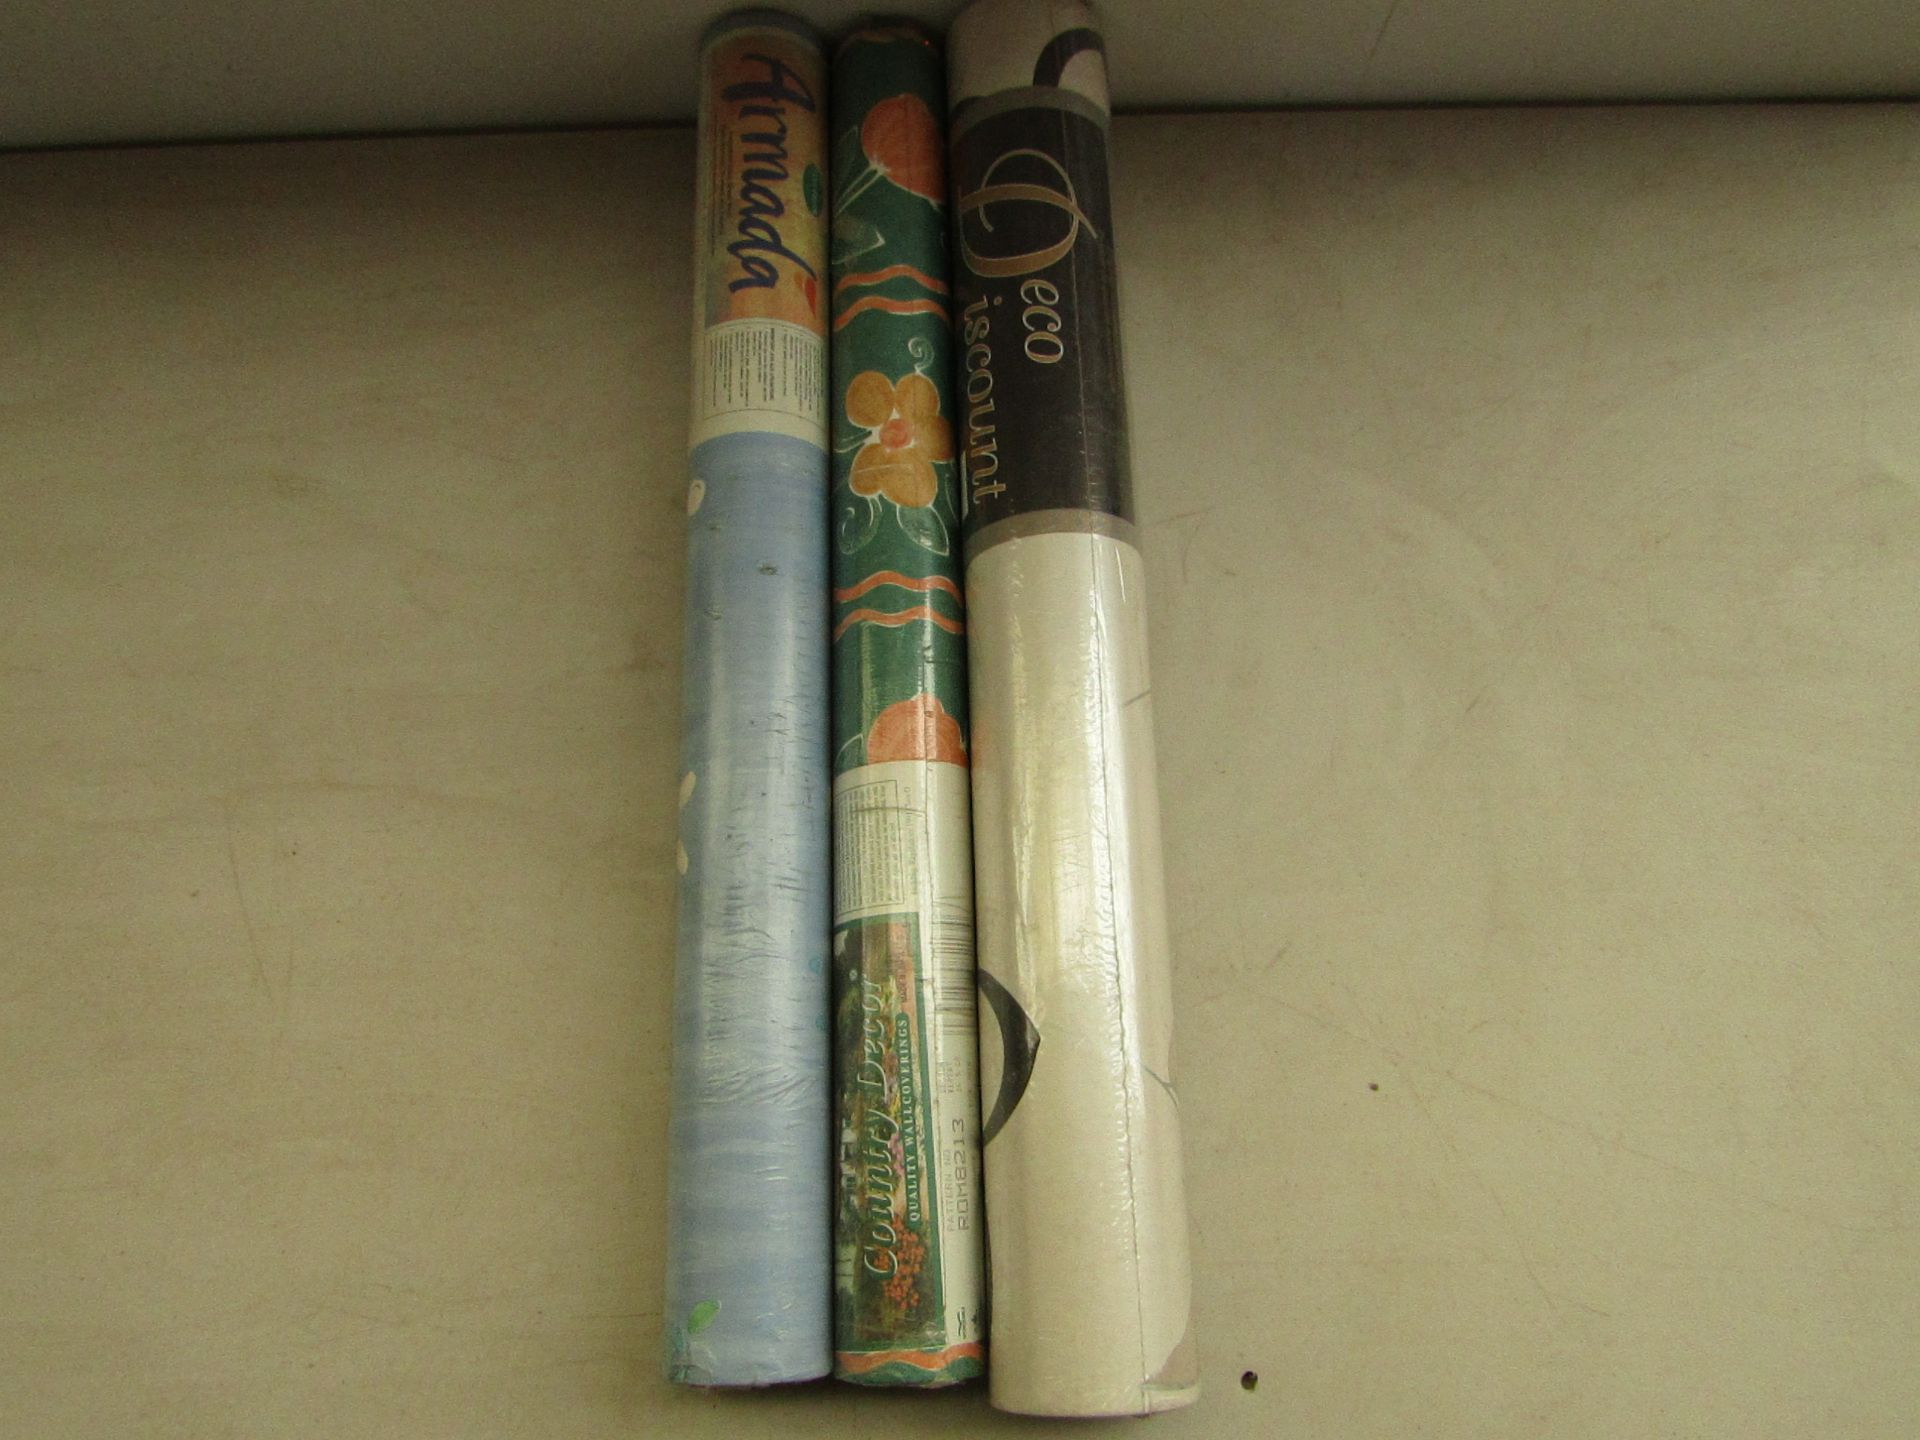 Box of 11x various rolls of wallpaper with brands such as Country decor and Armada.